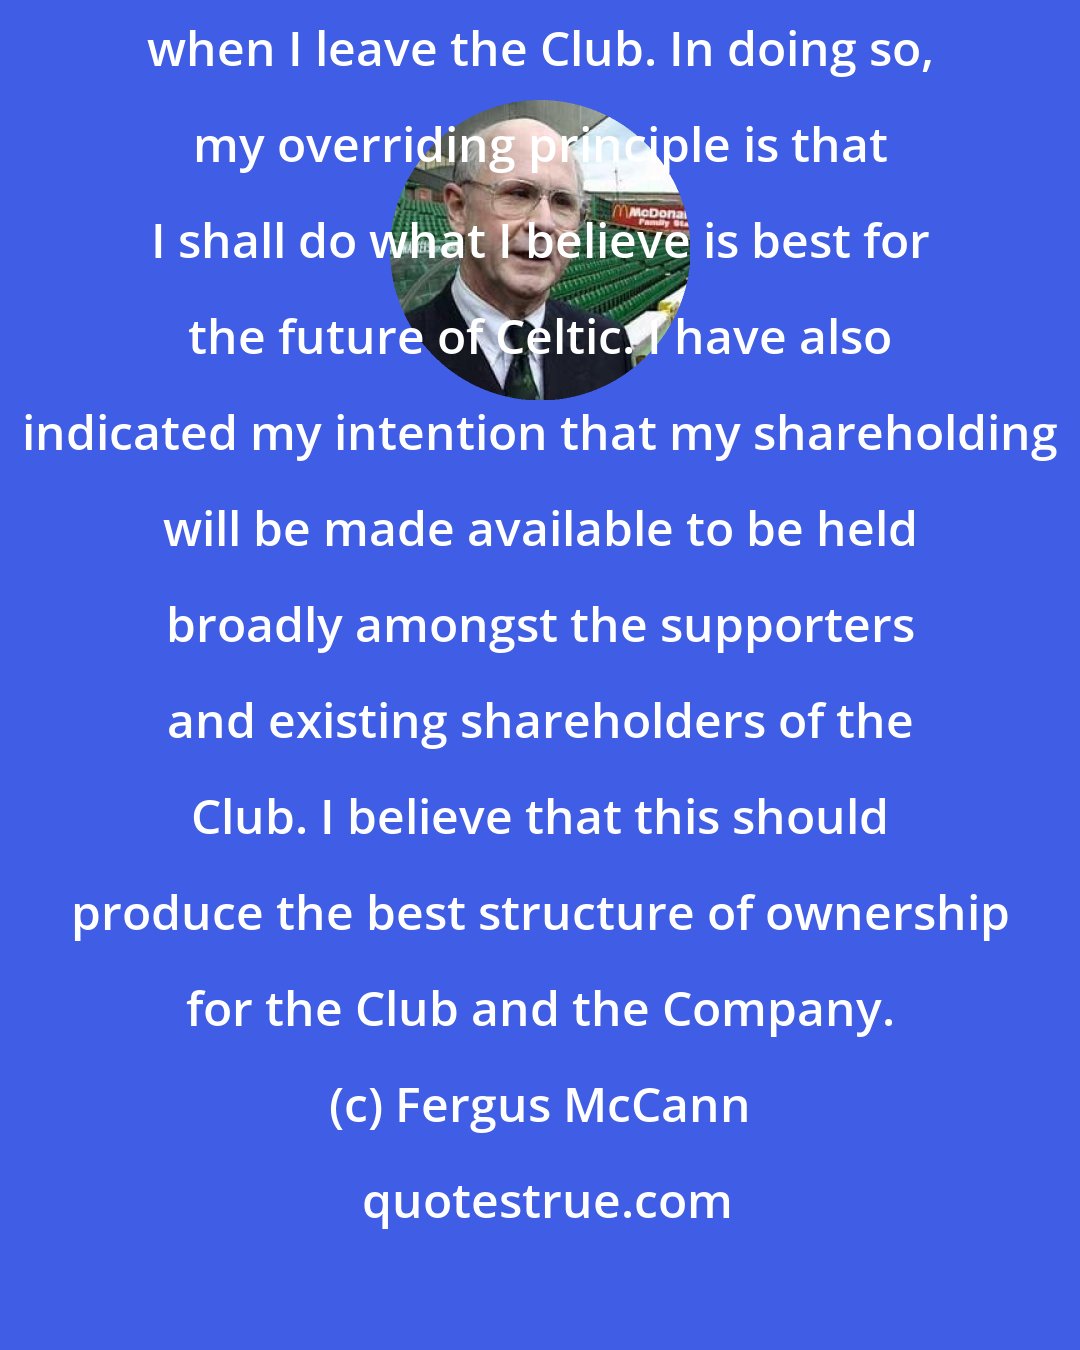 Fergus McCann: As I have indicated some time ago, I intend to divest my shareholding when I leave the Club. In doing so, my overriding principle is that I shall do what I believe is best for the future of Celtic. I have also indicated my intention that my shareholding will be made available to be held broadly amongst the supporters and existing shareholders of the Club. I believe that this should produce the best structure of ownership for the Club and the Company.